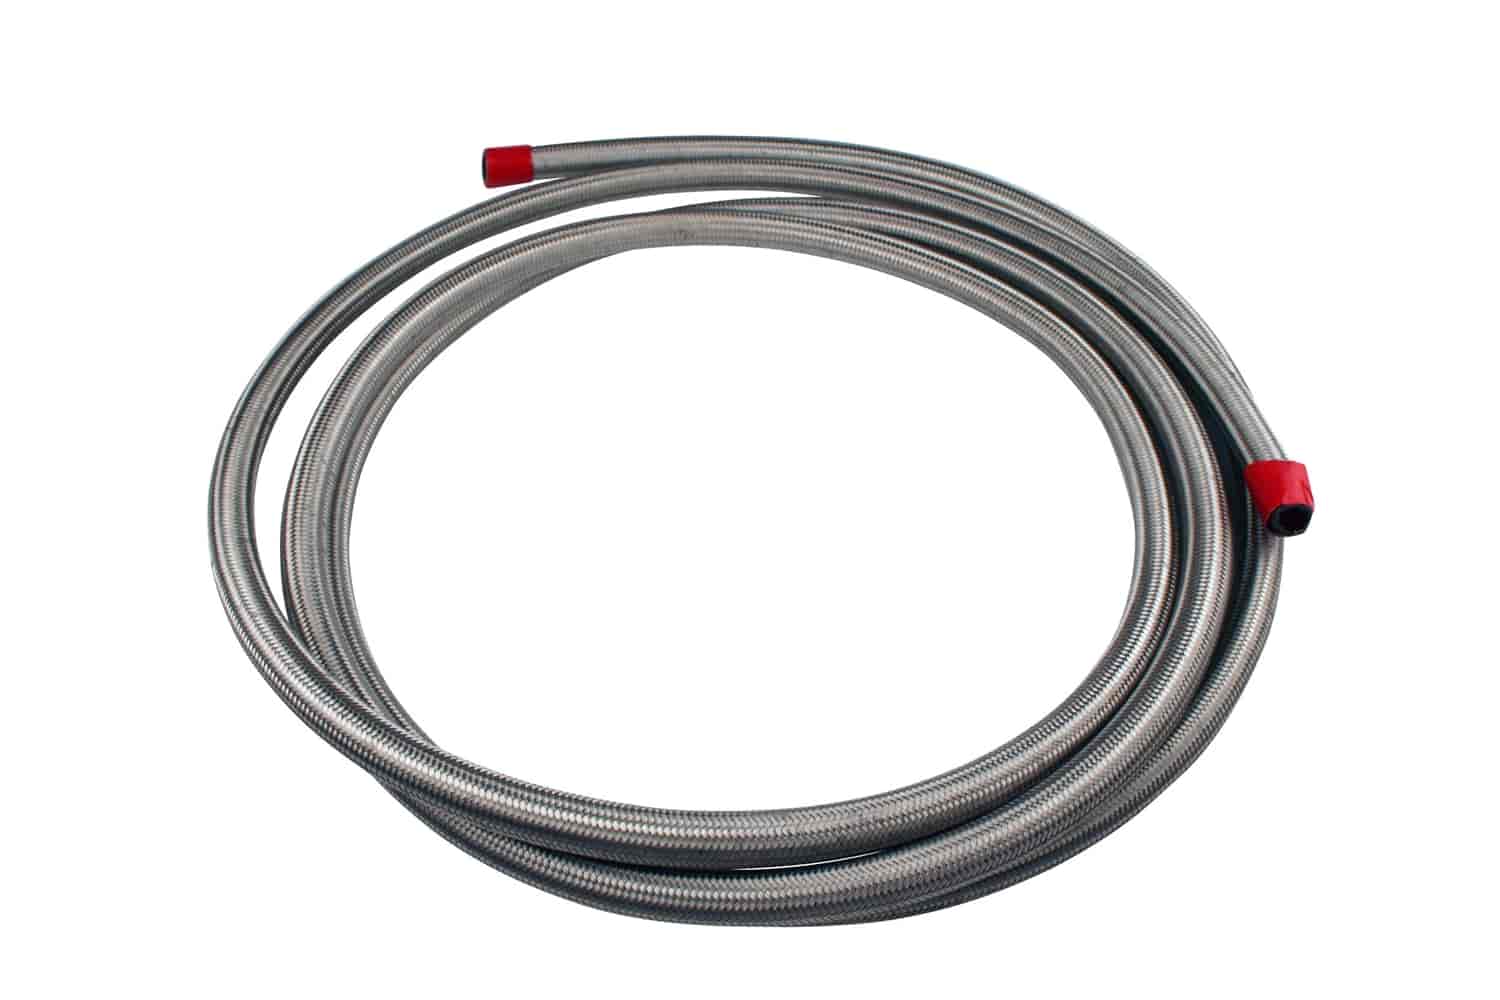 Braided Stainless Steel Fuel Hose -8AN x 12 ft